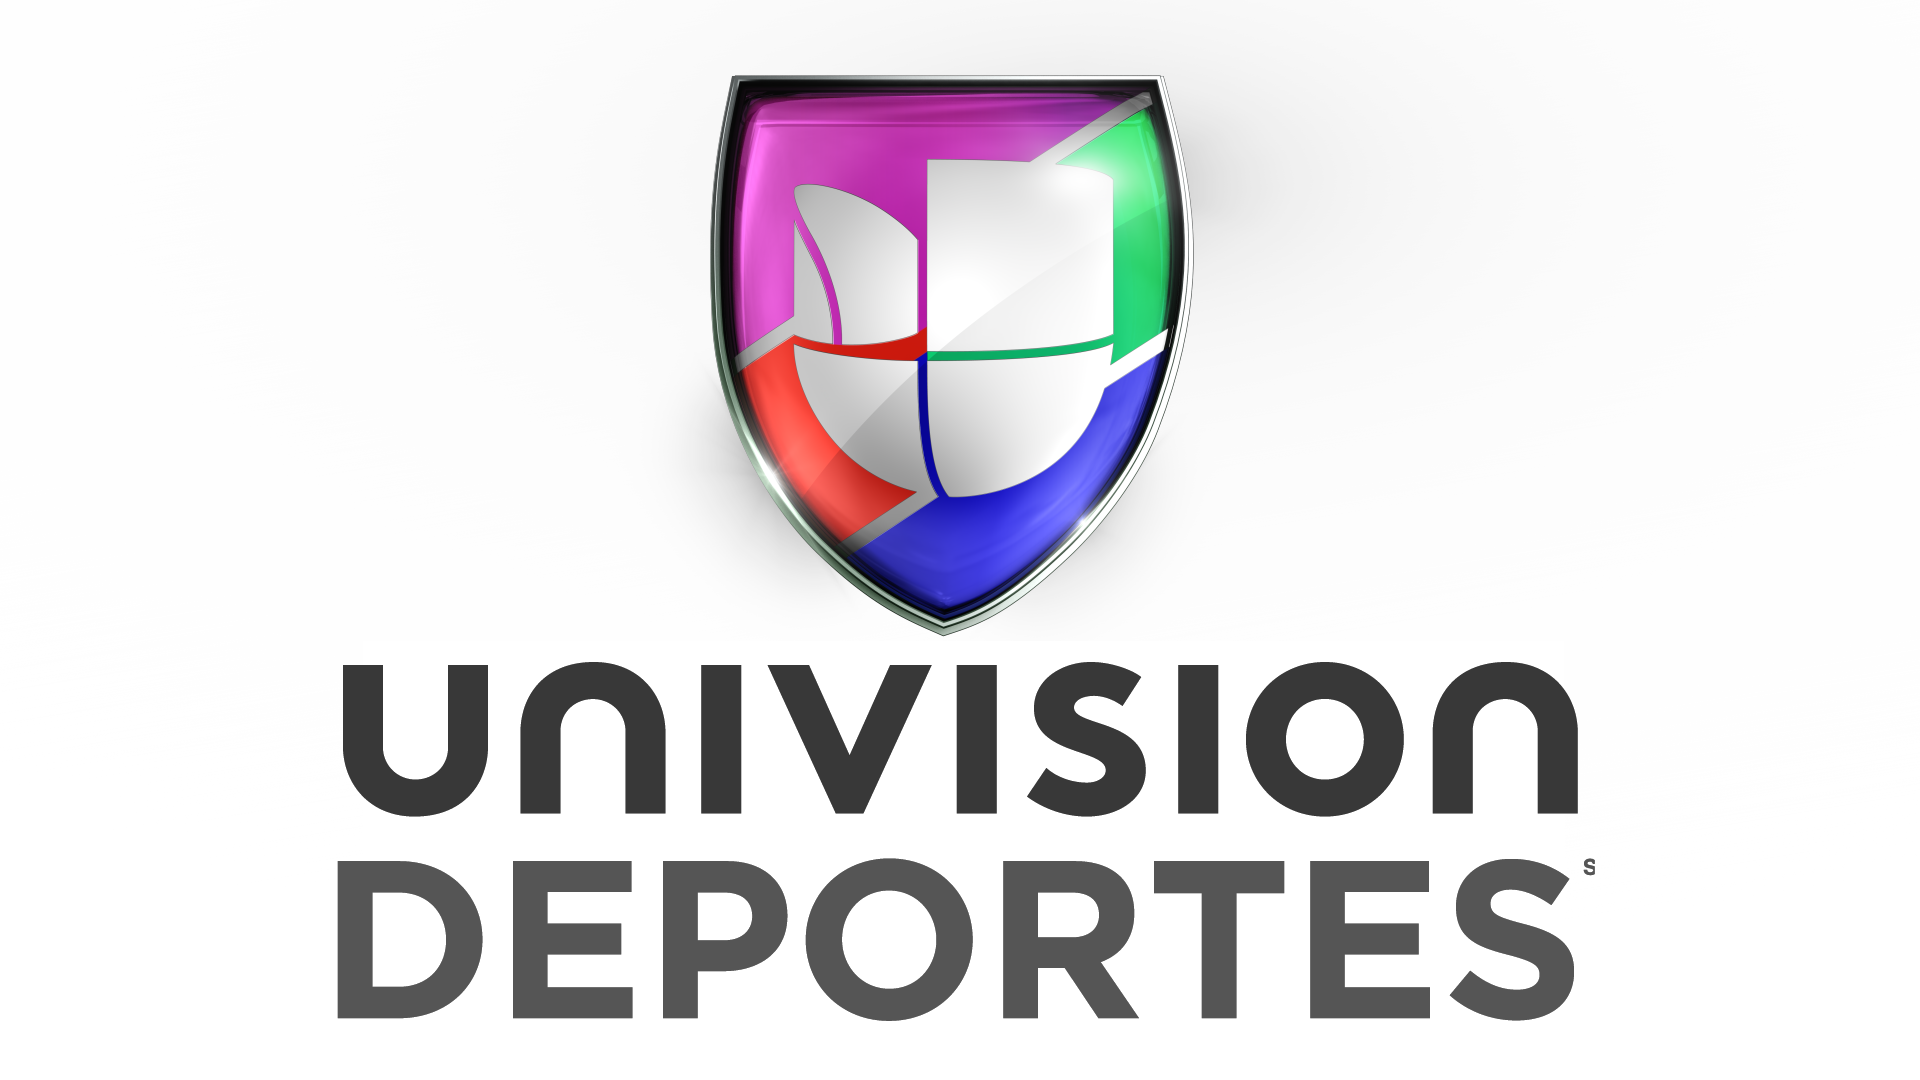 Univision Deportes says it has moved ahead of NBCSN among cable sports